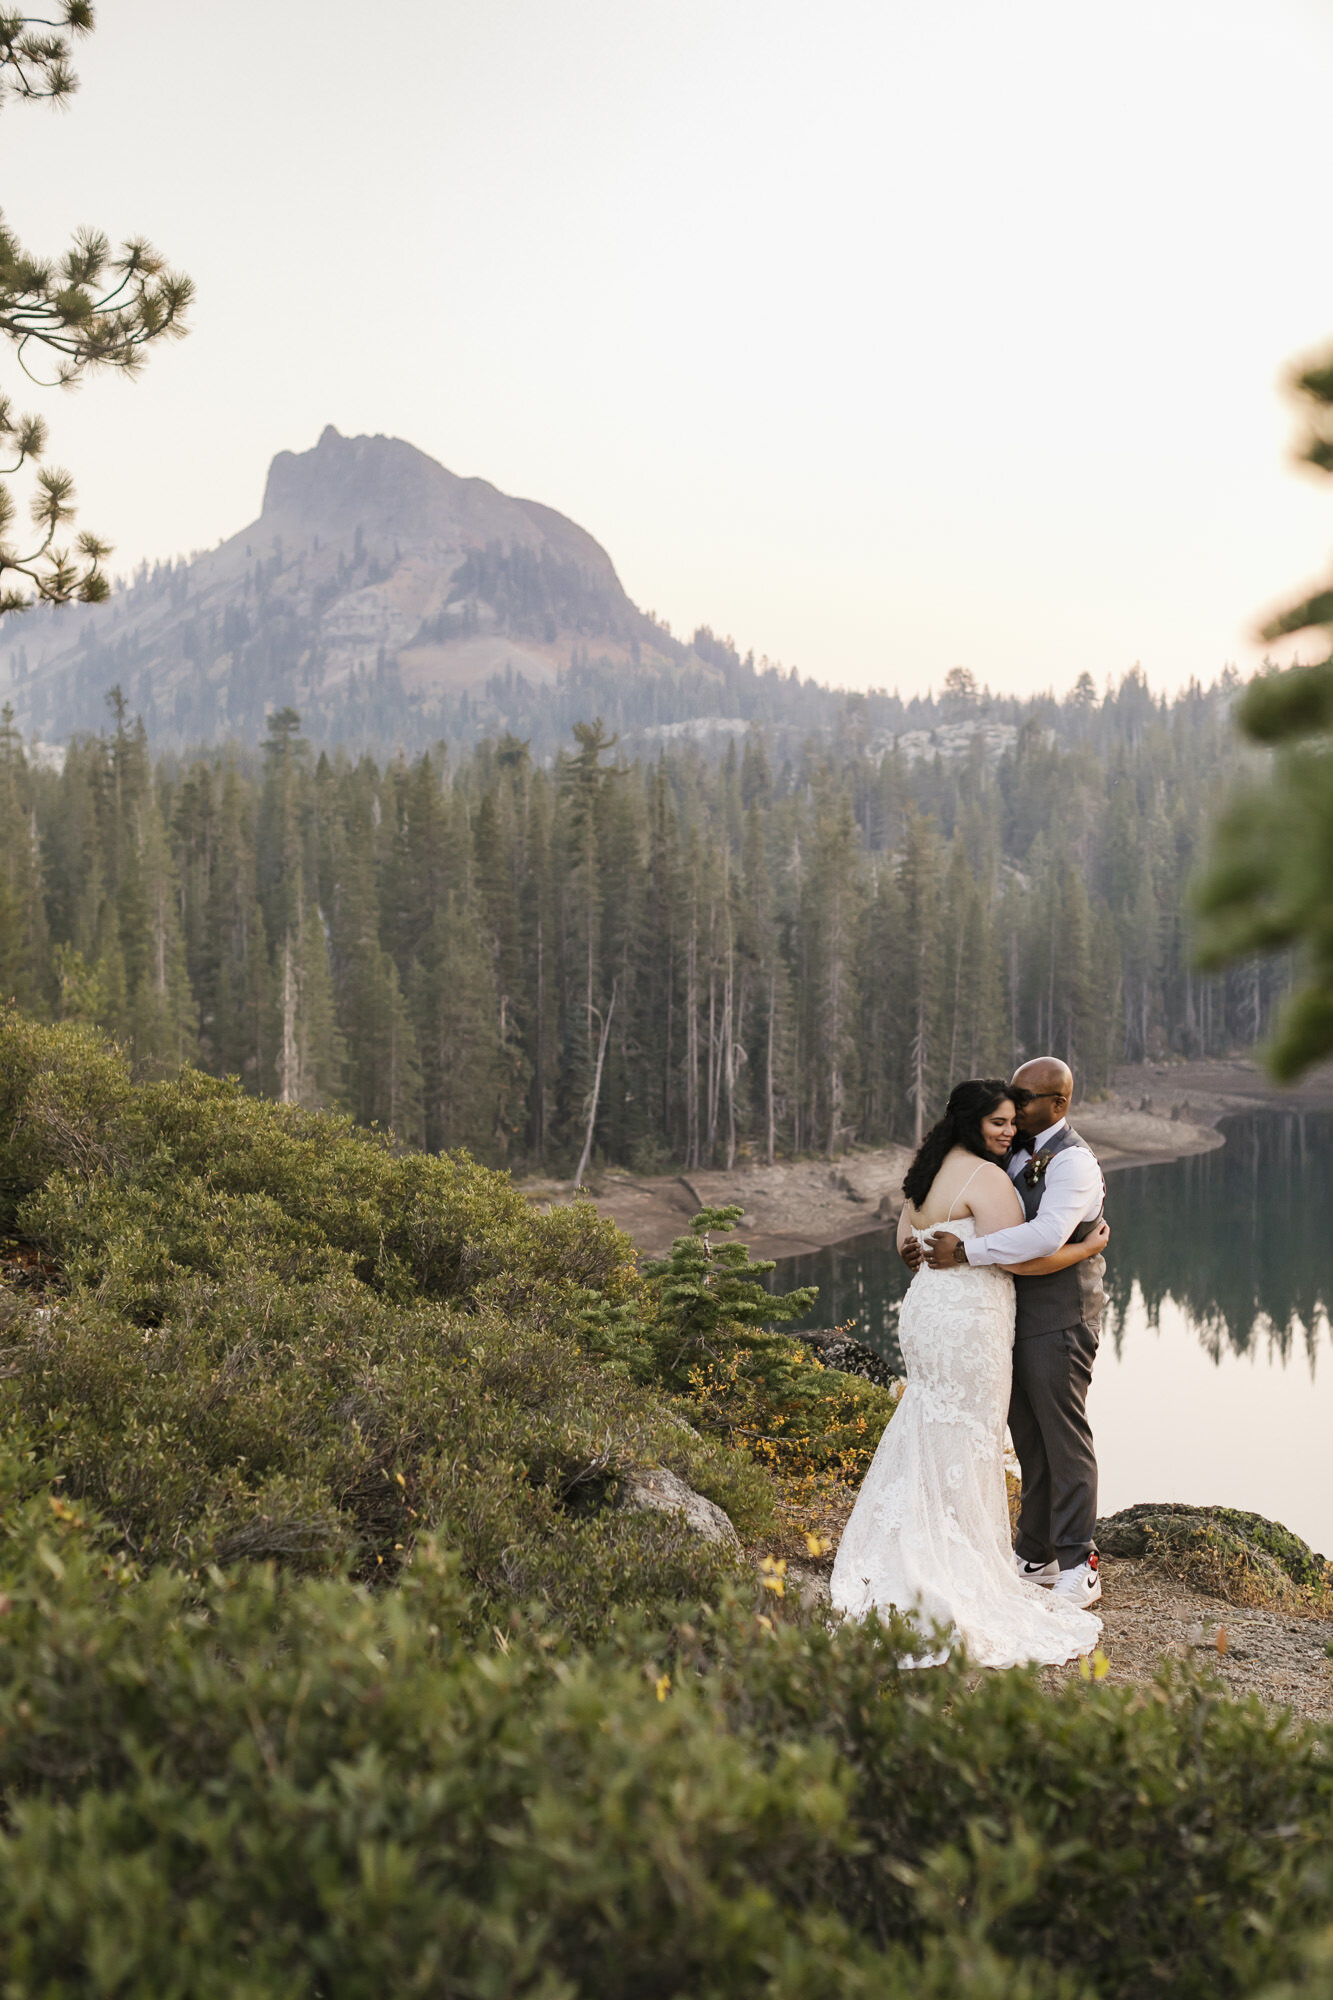 Wedding couple hold each other close with mountain peak in the distance behind them in Tahoe forest